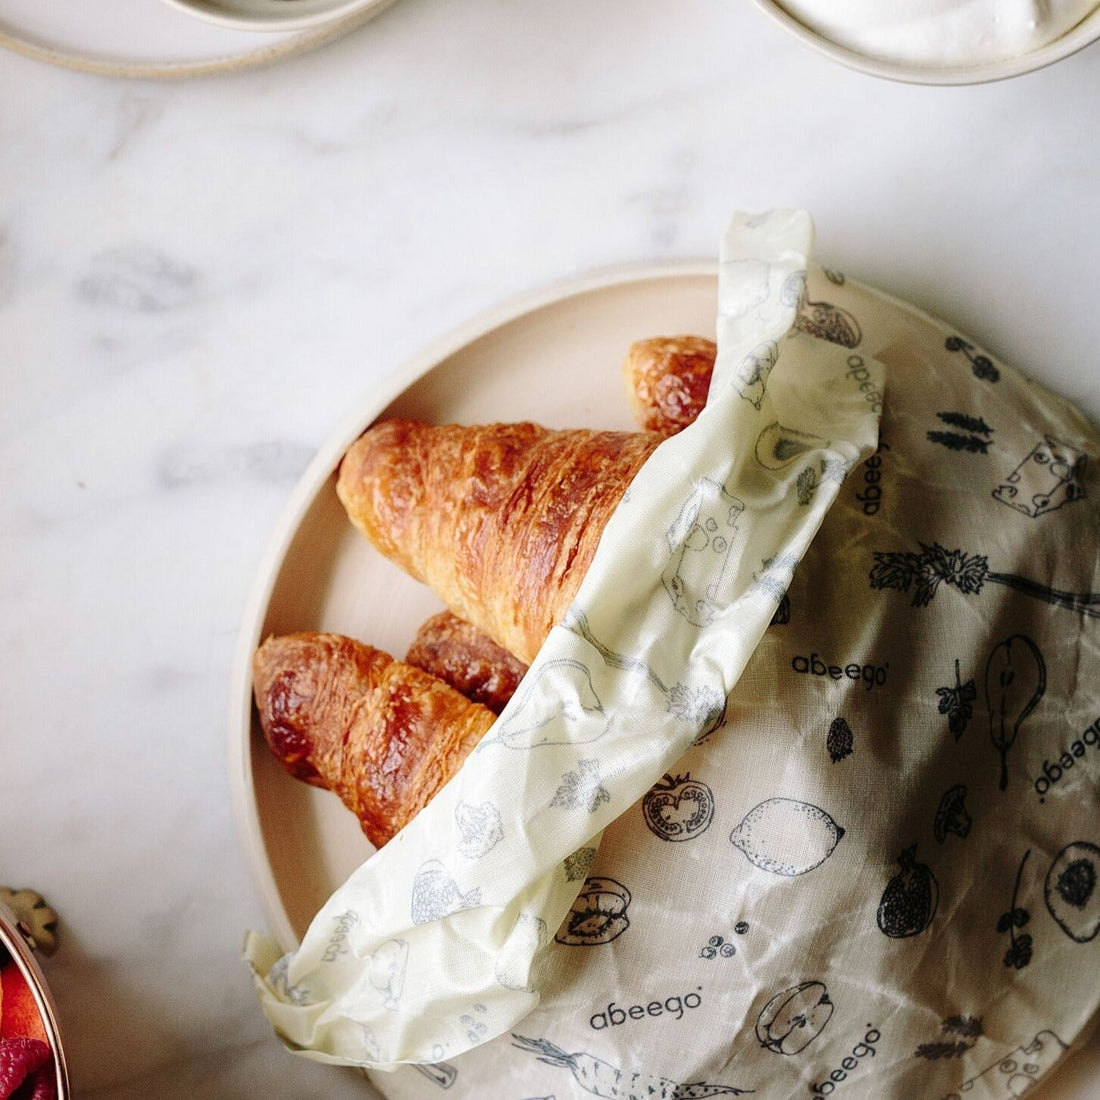 Abeego Beeswax Food Wrap. Large Size Shown Wrapped Around Plate with Croissants on Countertop.